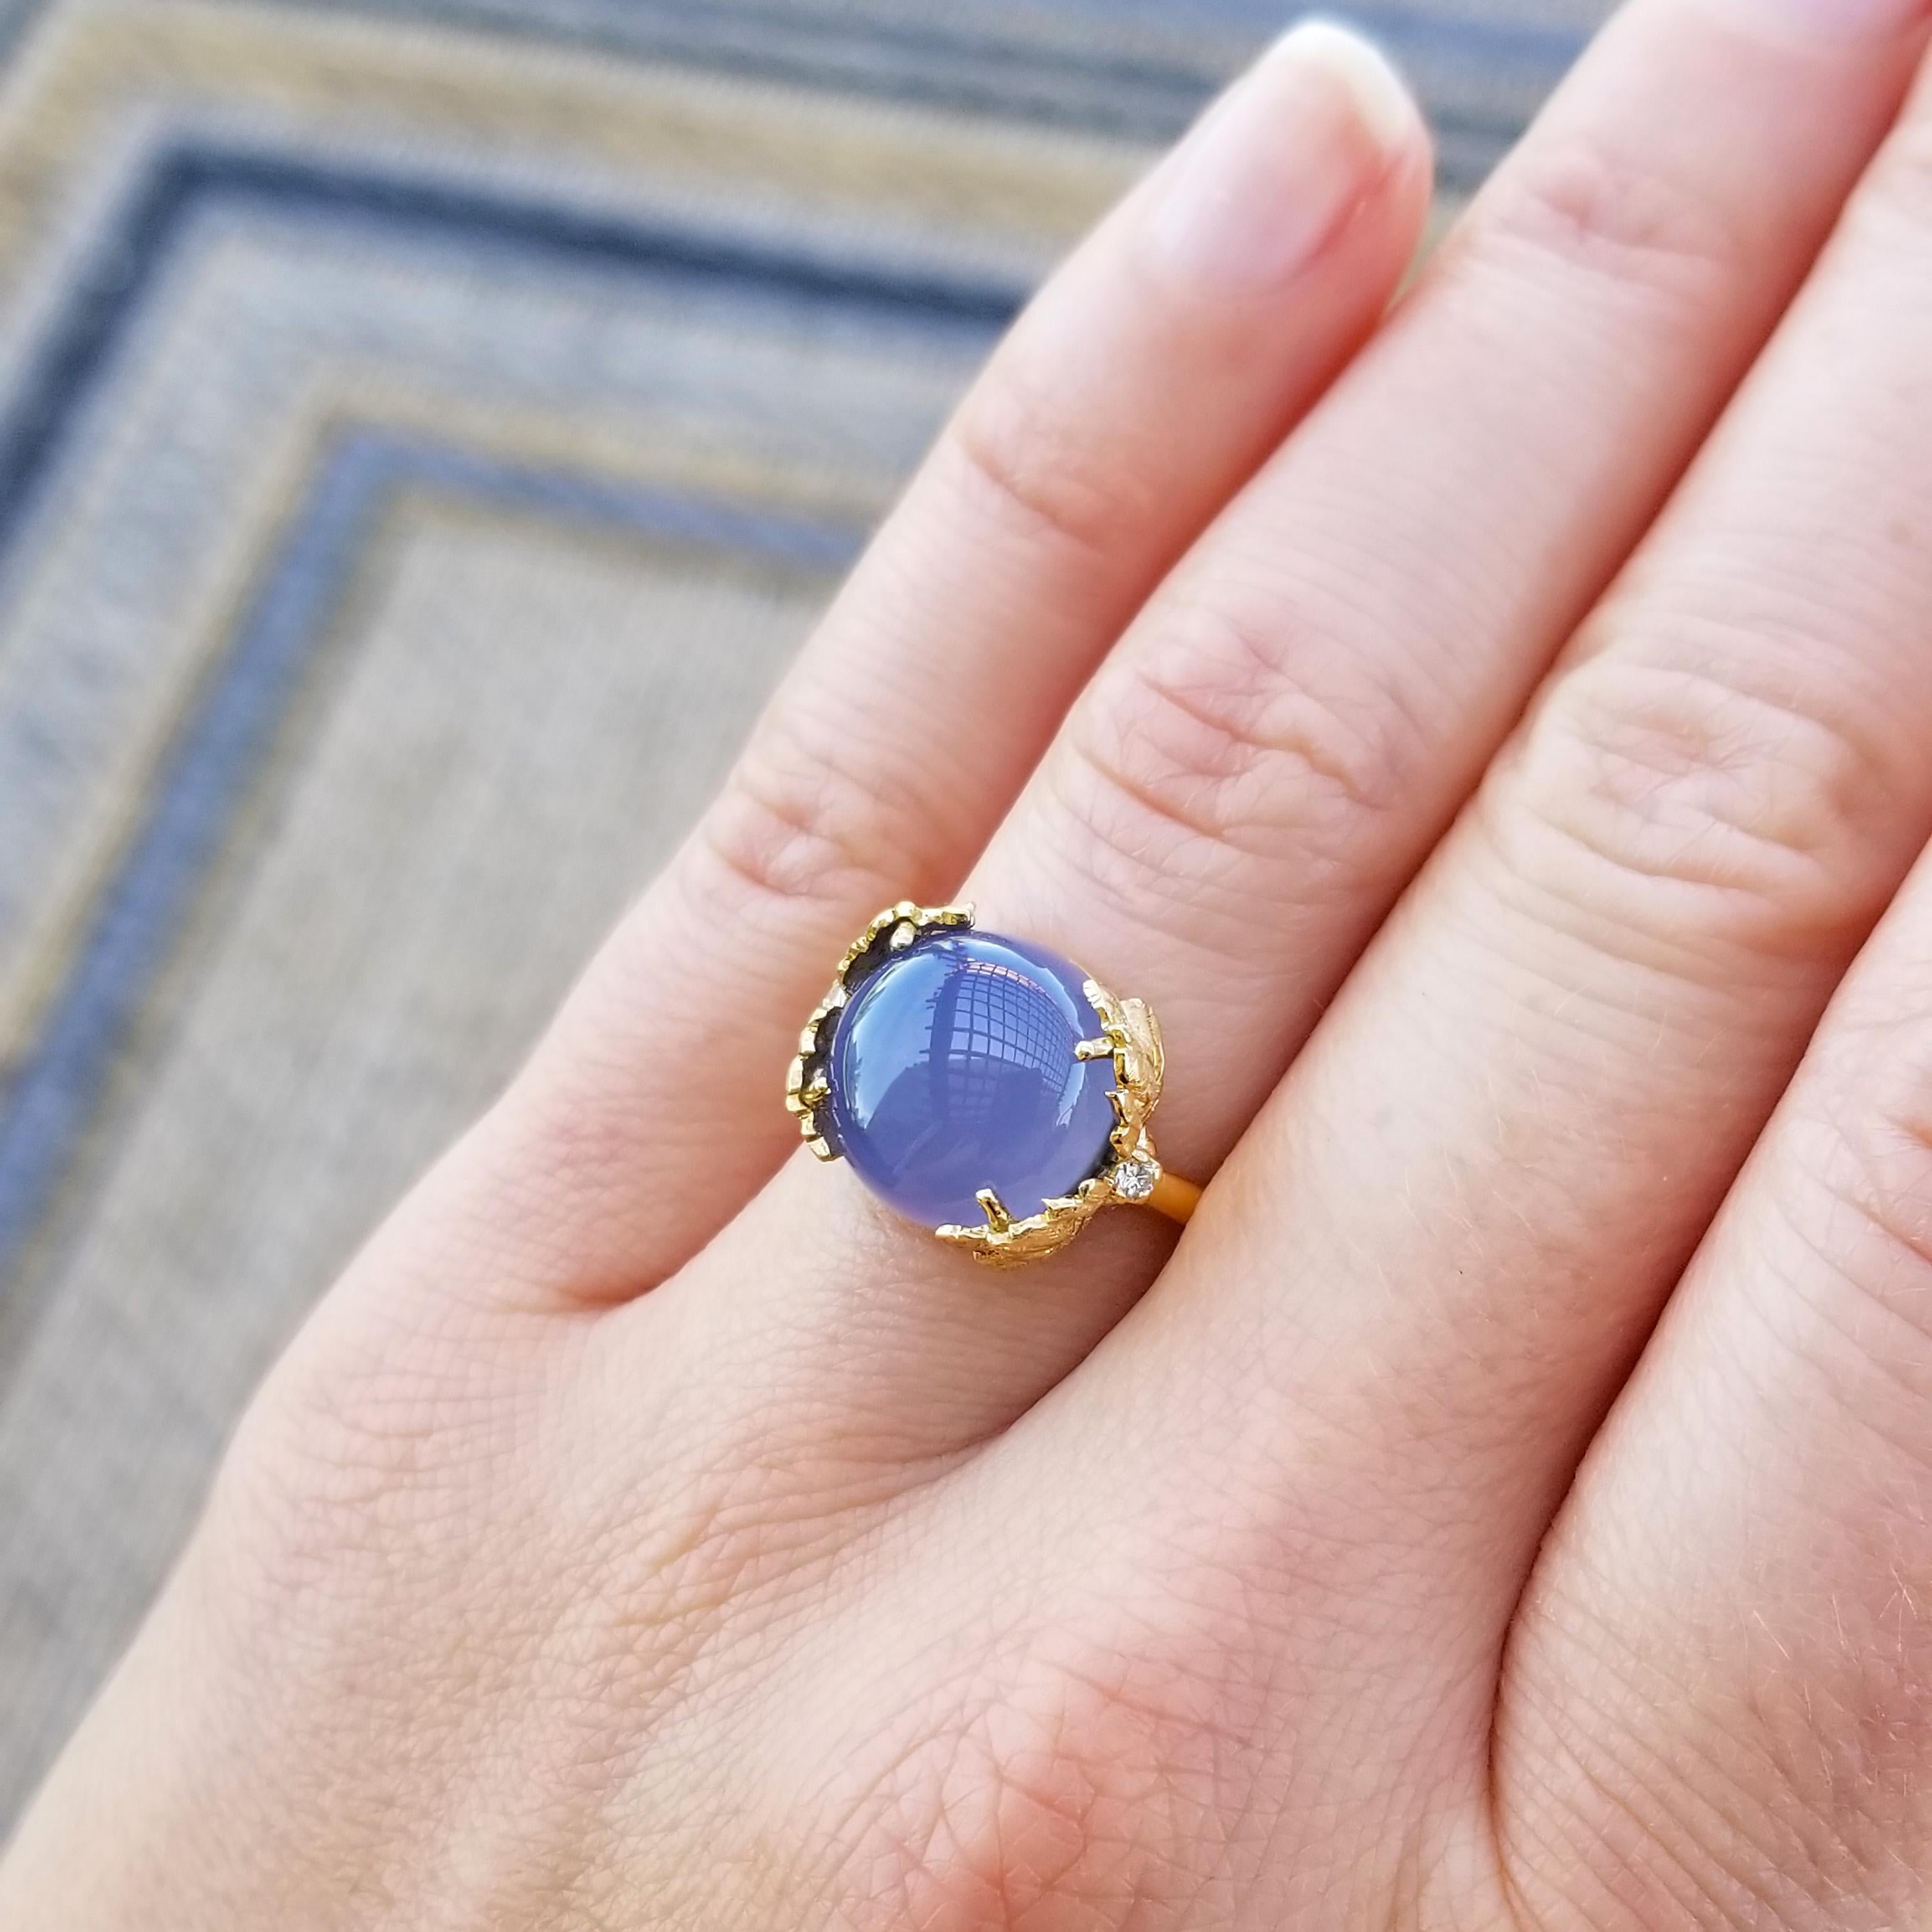 Chalcedony in a richly saturated violet blue nestles elegantly in the leaves of this custom Florentine engraved handmade 18kt ring. The soft translucence of this top quality Namibian chalcedony allows the light to play through the gemstone.

The